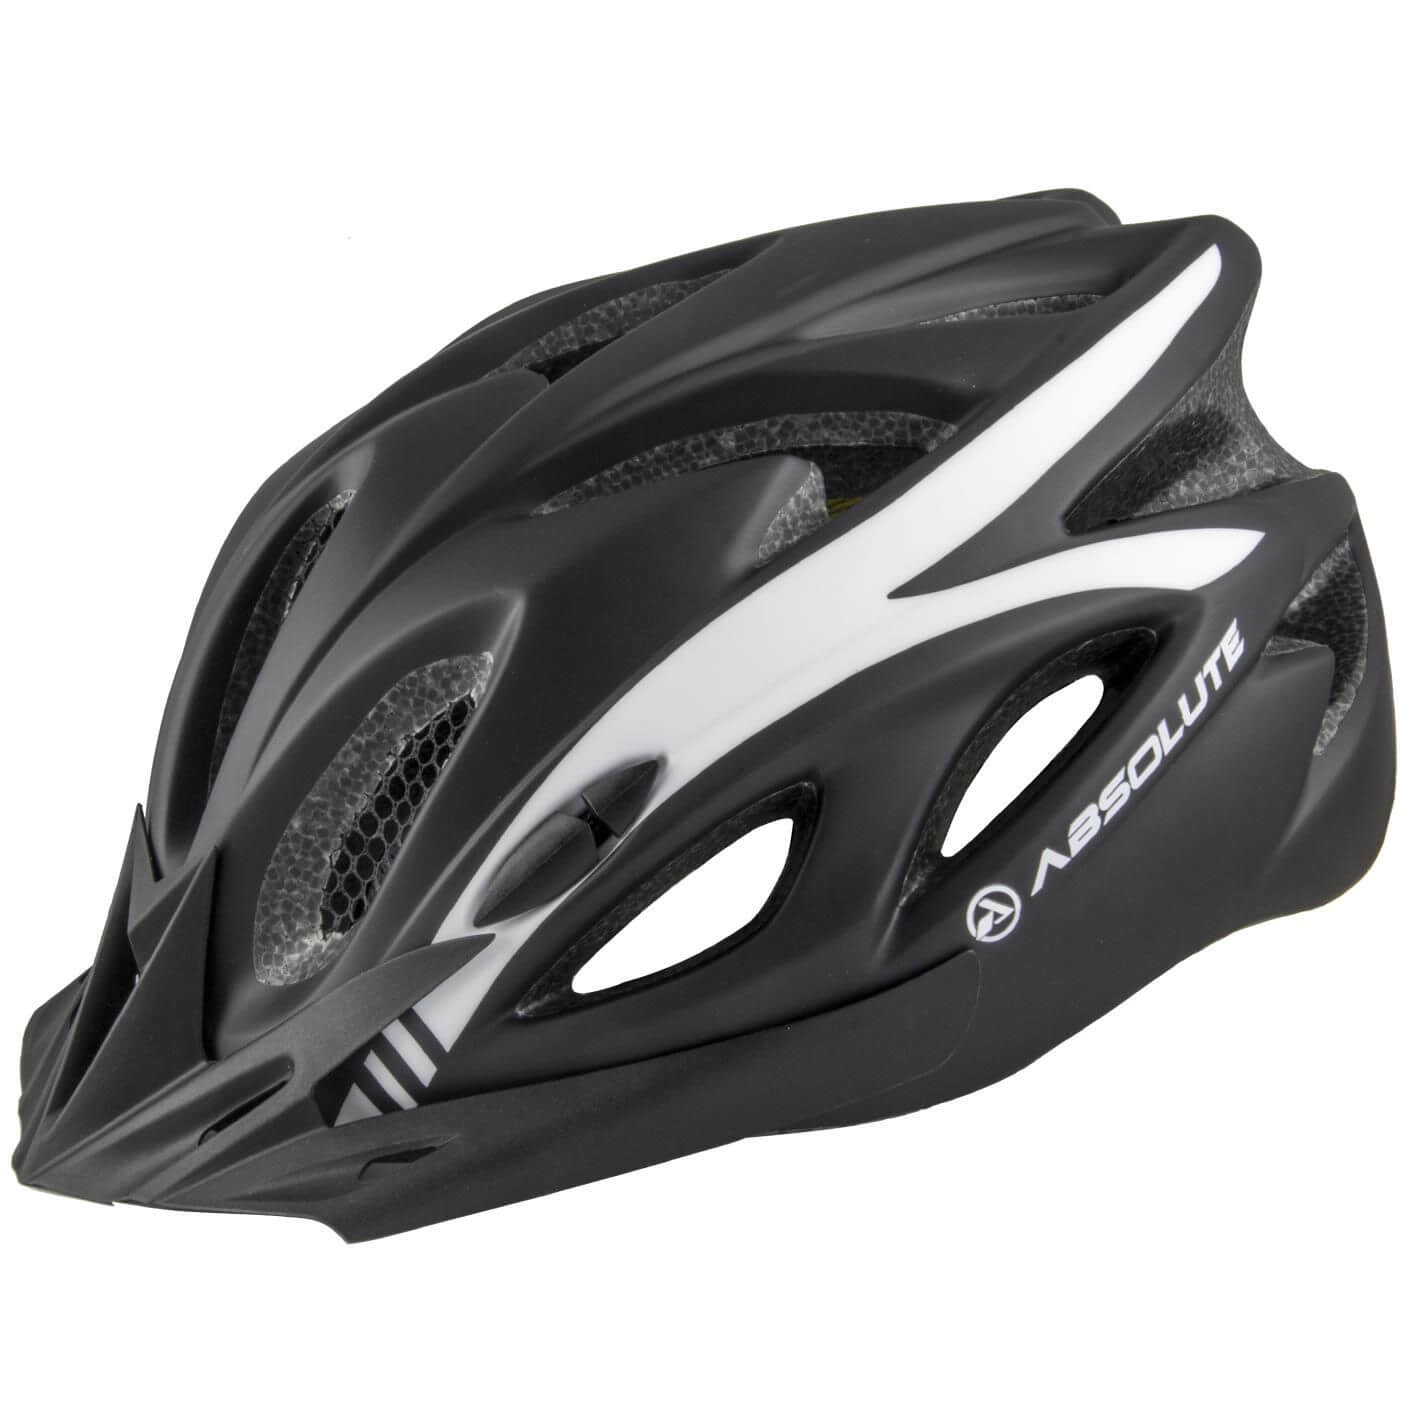 Capacete Ciclismo Bike Absolute  Led Pisca - Wt012